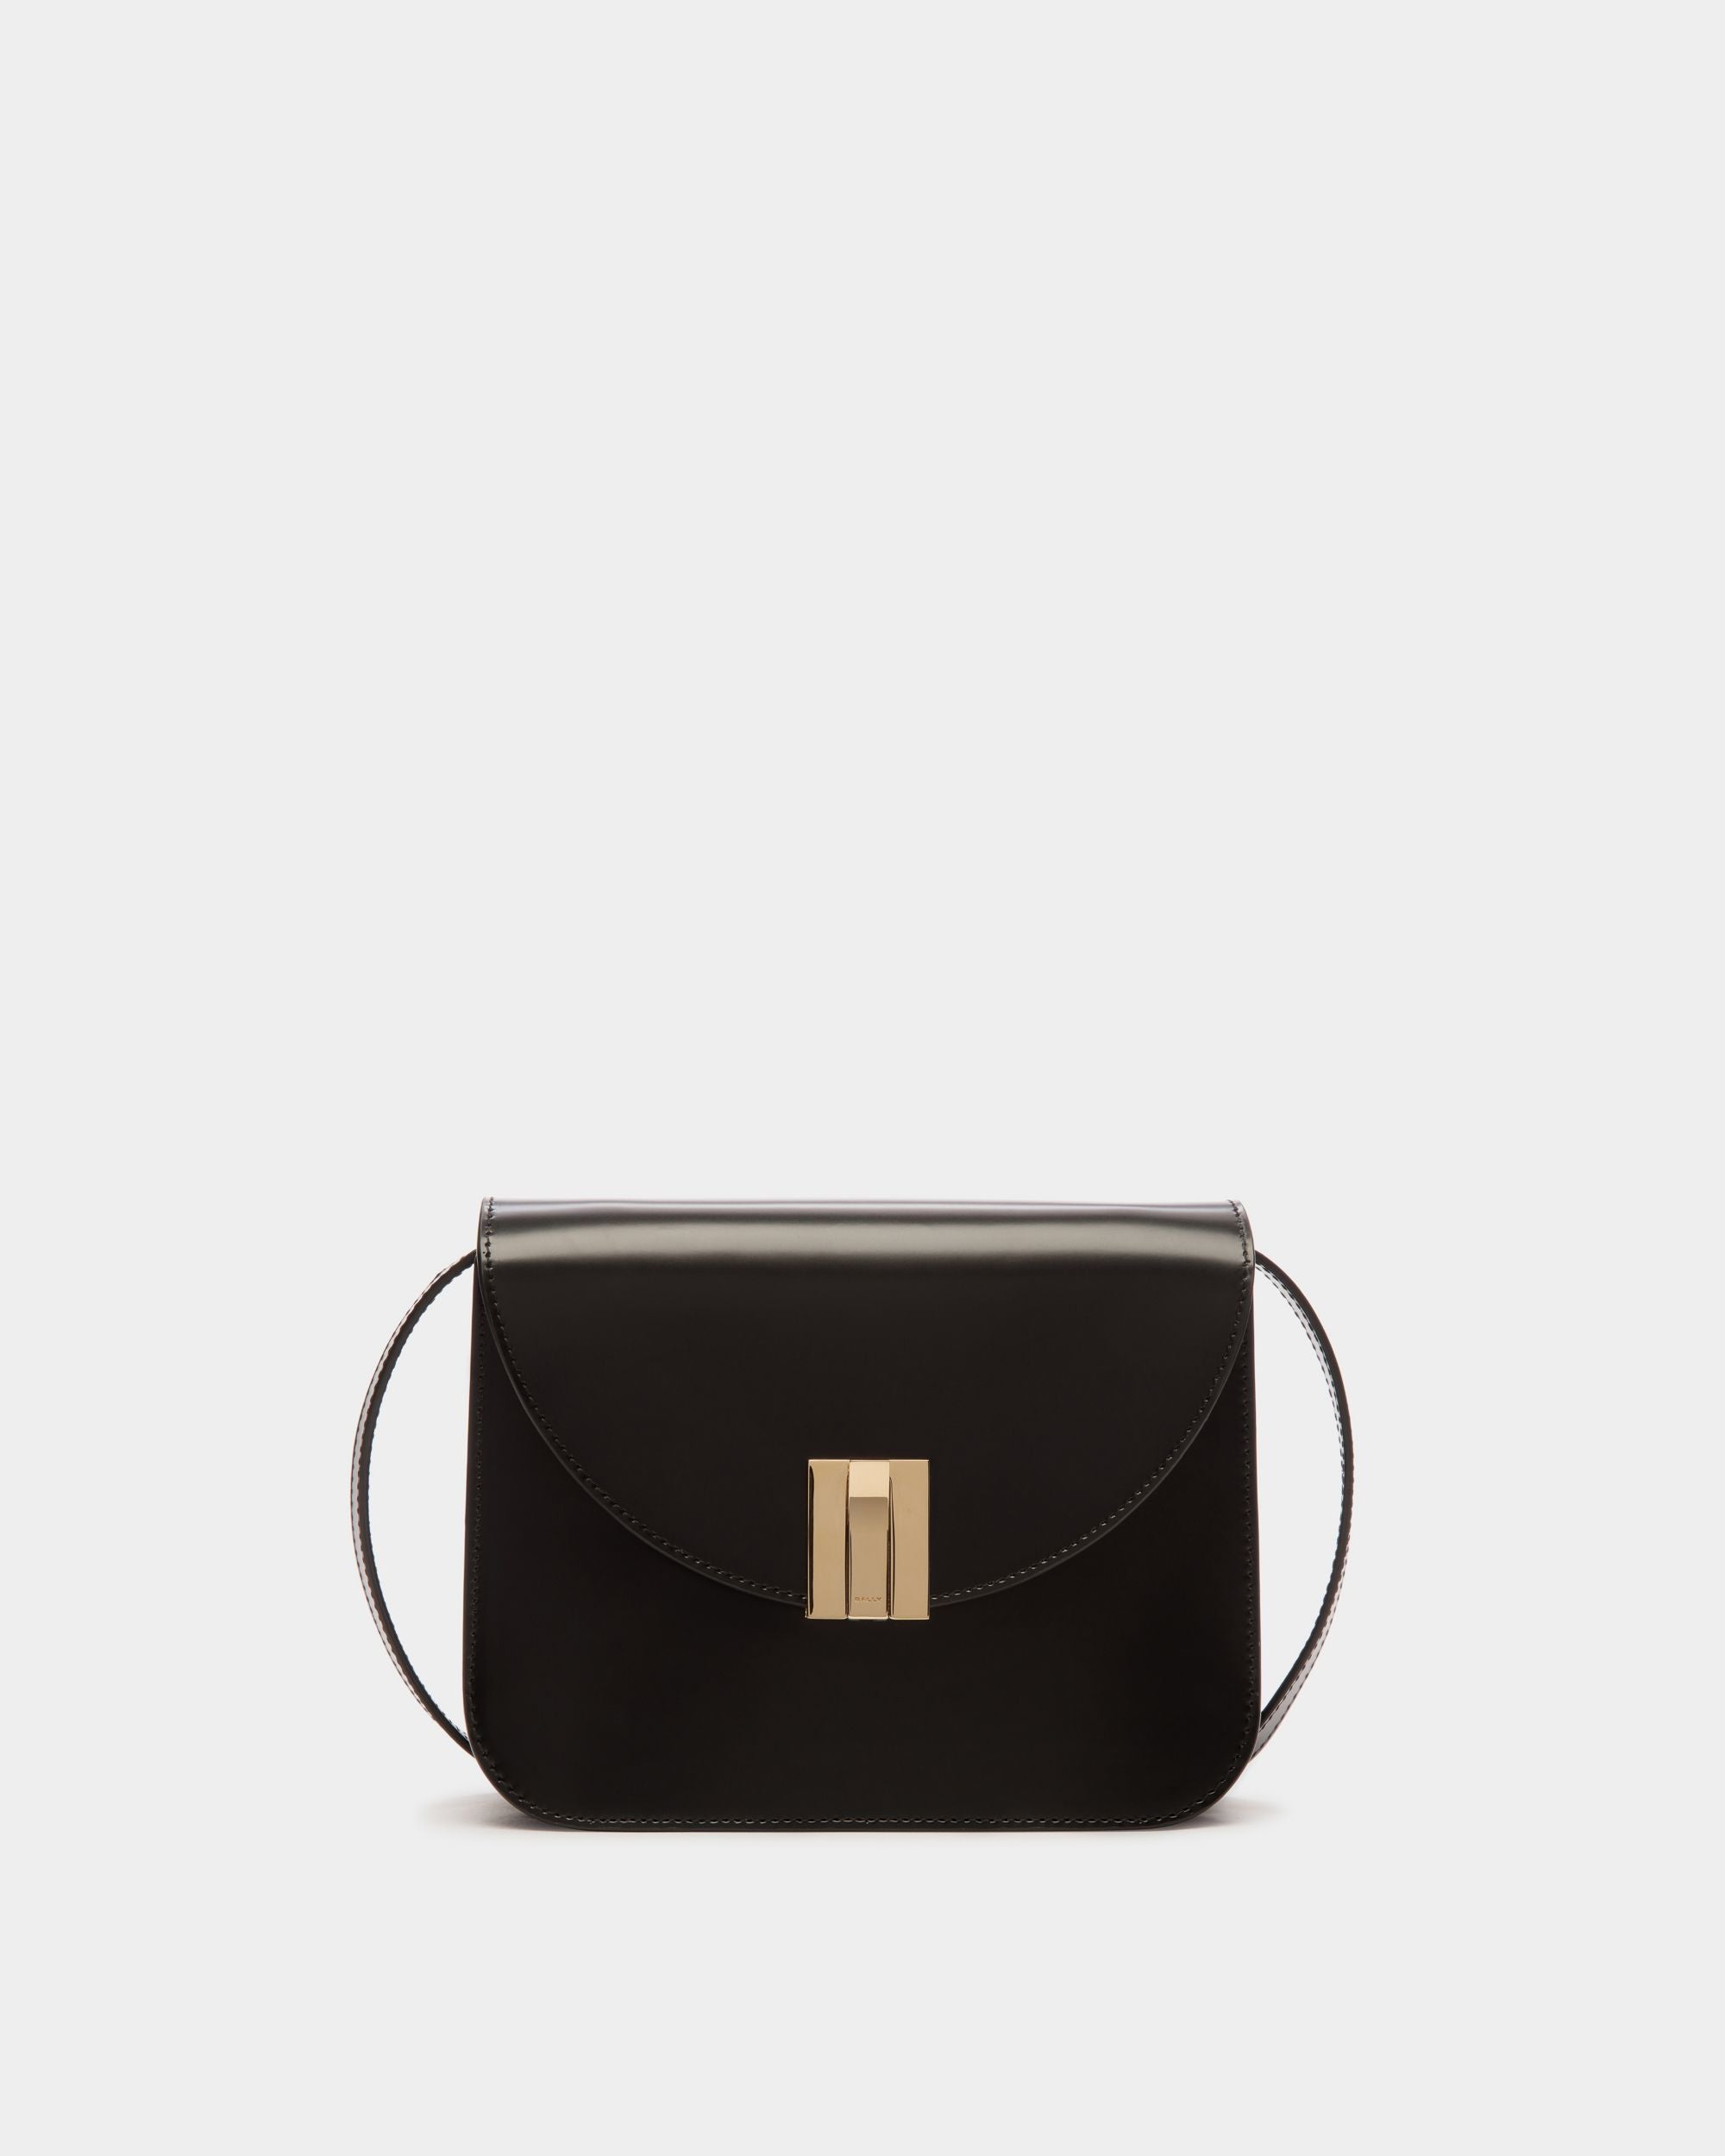 Women's Ollam Crossbody Bag in Black Brushed Leather | Bally | Still Life Front